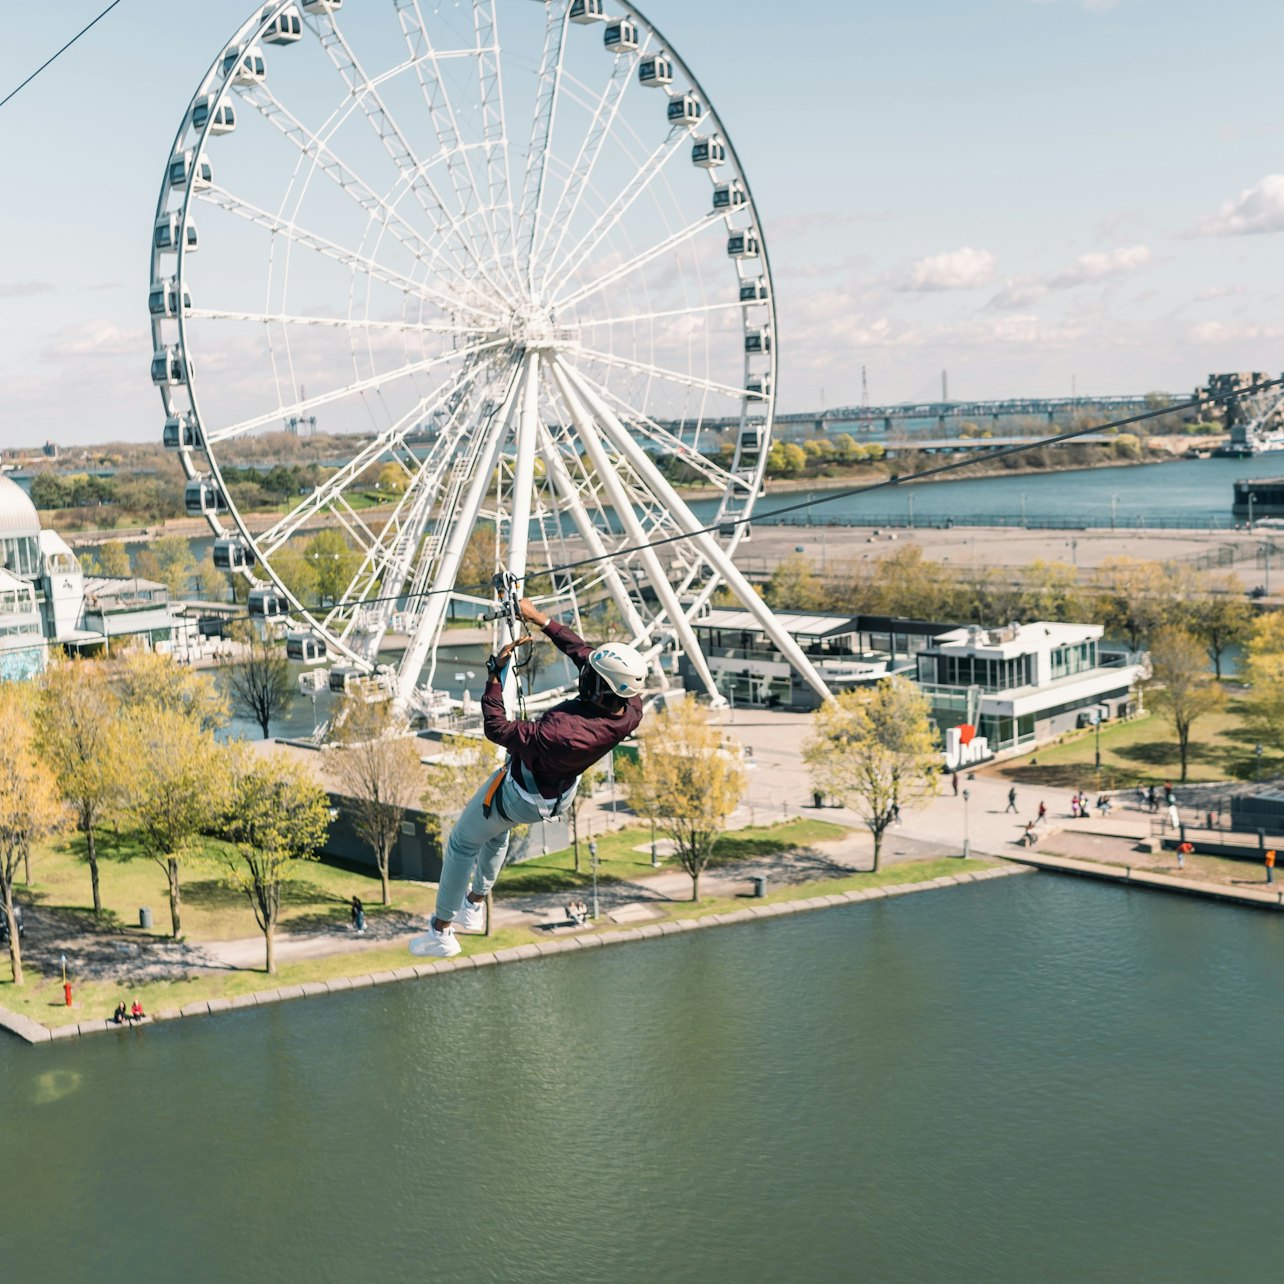 MTL Zipline Experience - Accommodations in Montreal